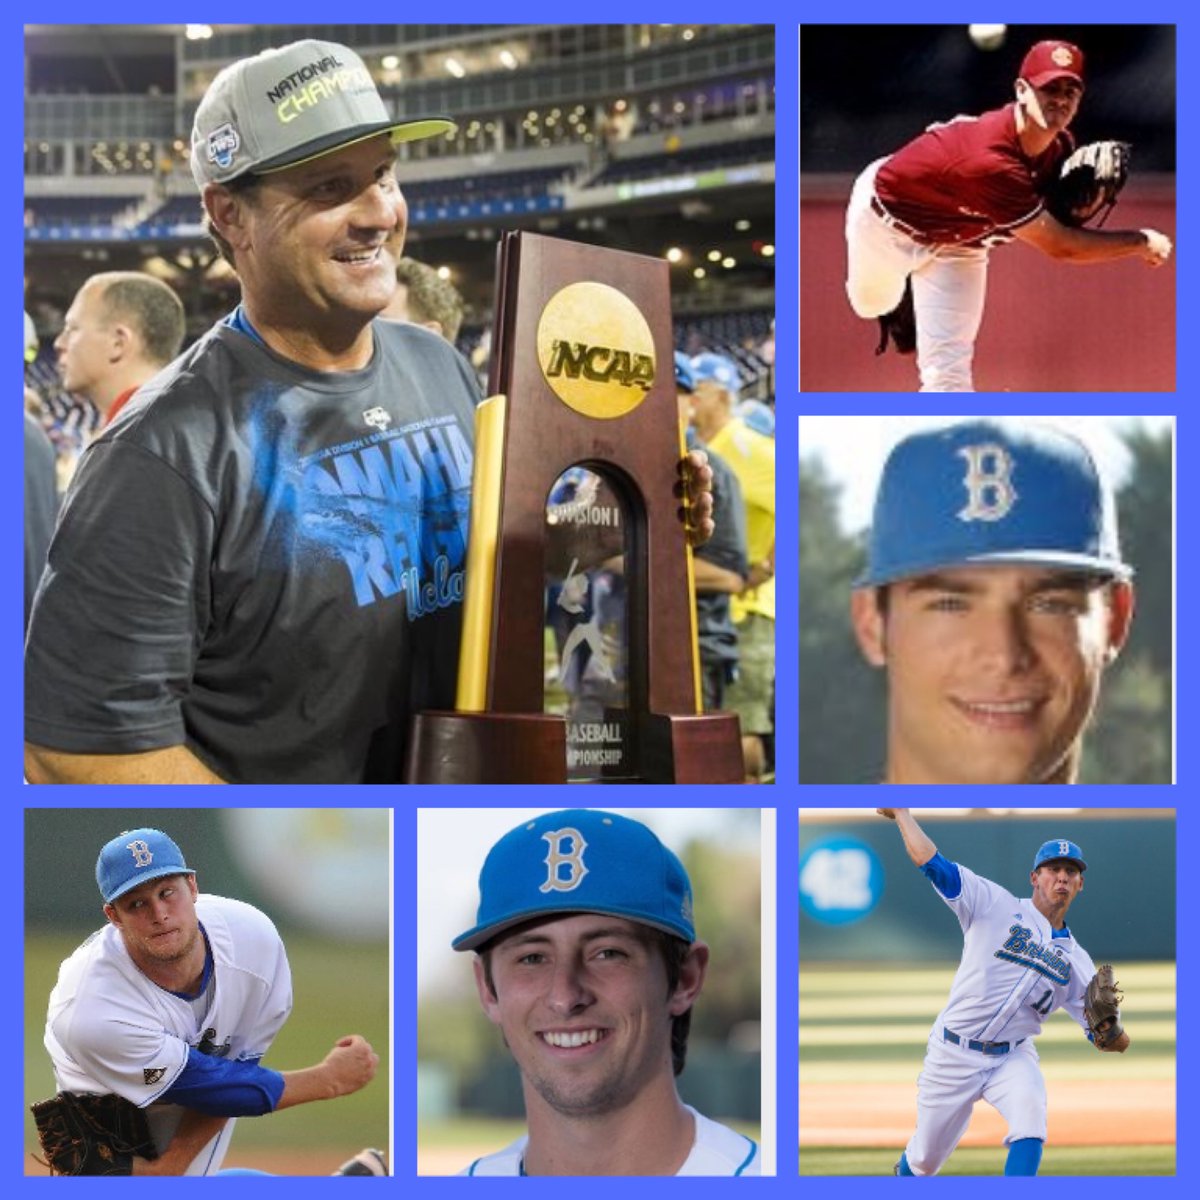 It’s not everyday as a Coach you can say you helped Coach,mentor and develop such enormous talents in Mark Prior and Gerrit Cole and another 117 have been good enough to be drafted. Athlete911 Sunday Clinic TONIGHT UCLA Head Coach John Savage 5:50 PST @TwitterSpaces @UCLABaseball https://t.co/cGzFjHVAZ9